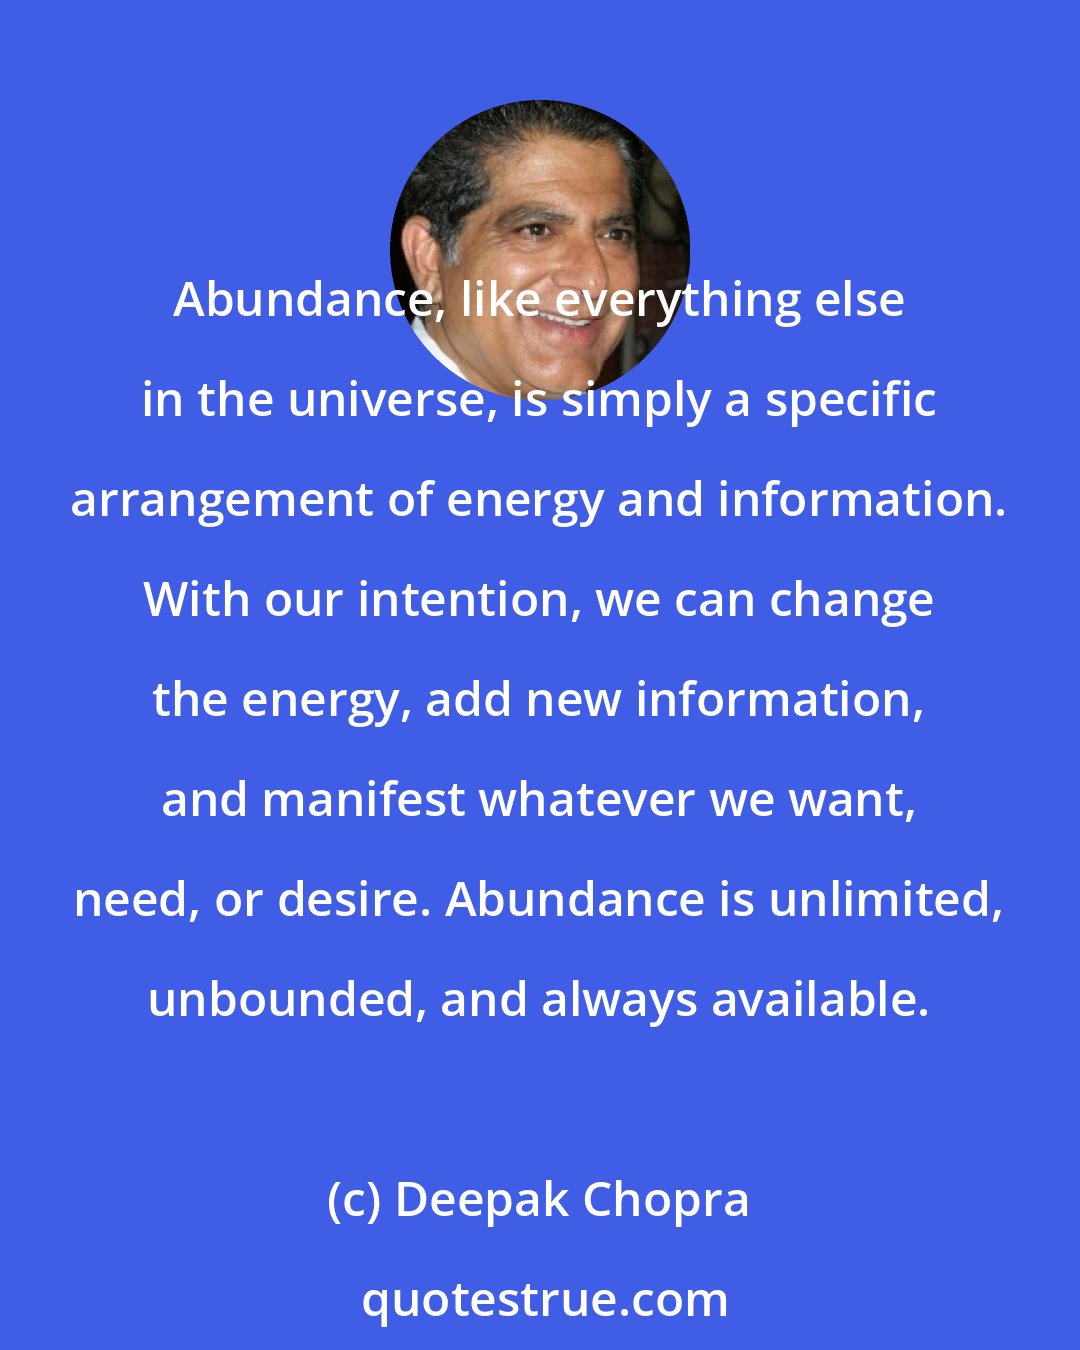 Deepak Chopra: Abundance, like everything else in the universe, is simply a specific arrangement of energy and information. With our intention, we can change the energy, add new information, and manifest whatever we want, need, or desire. Abundance is unlimited, unbounded, and always available.